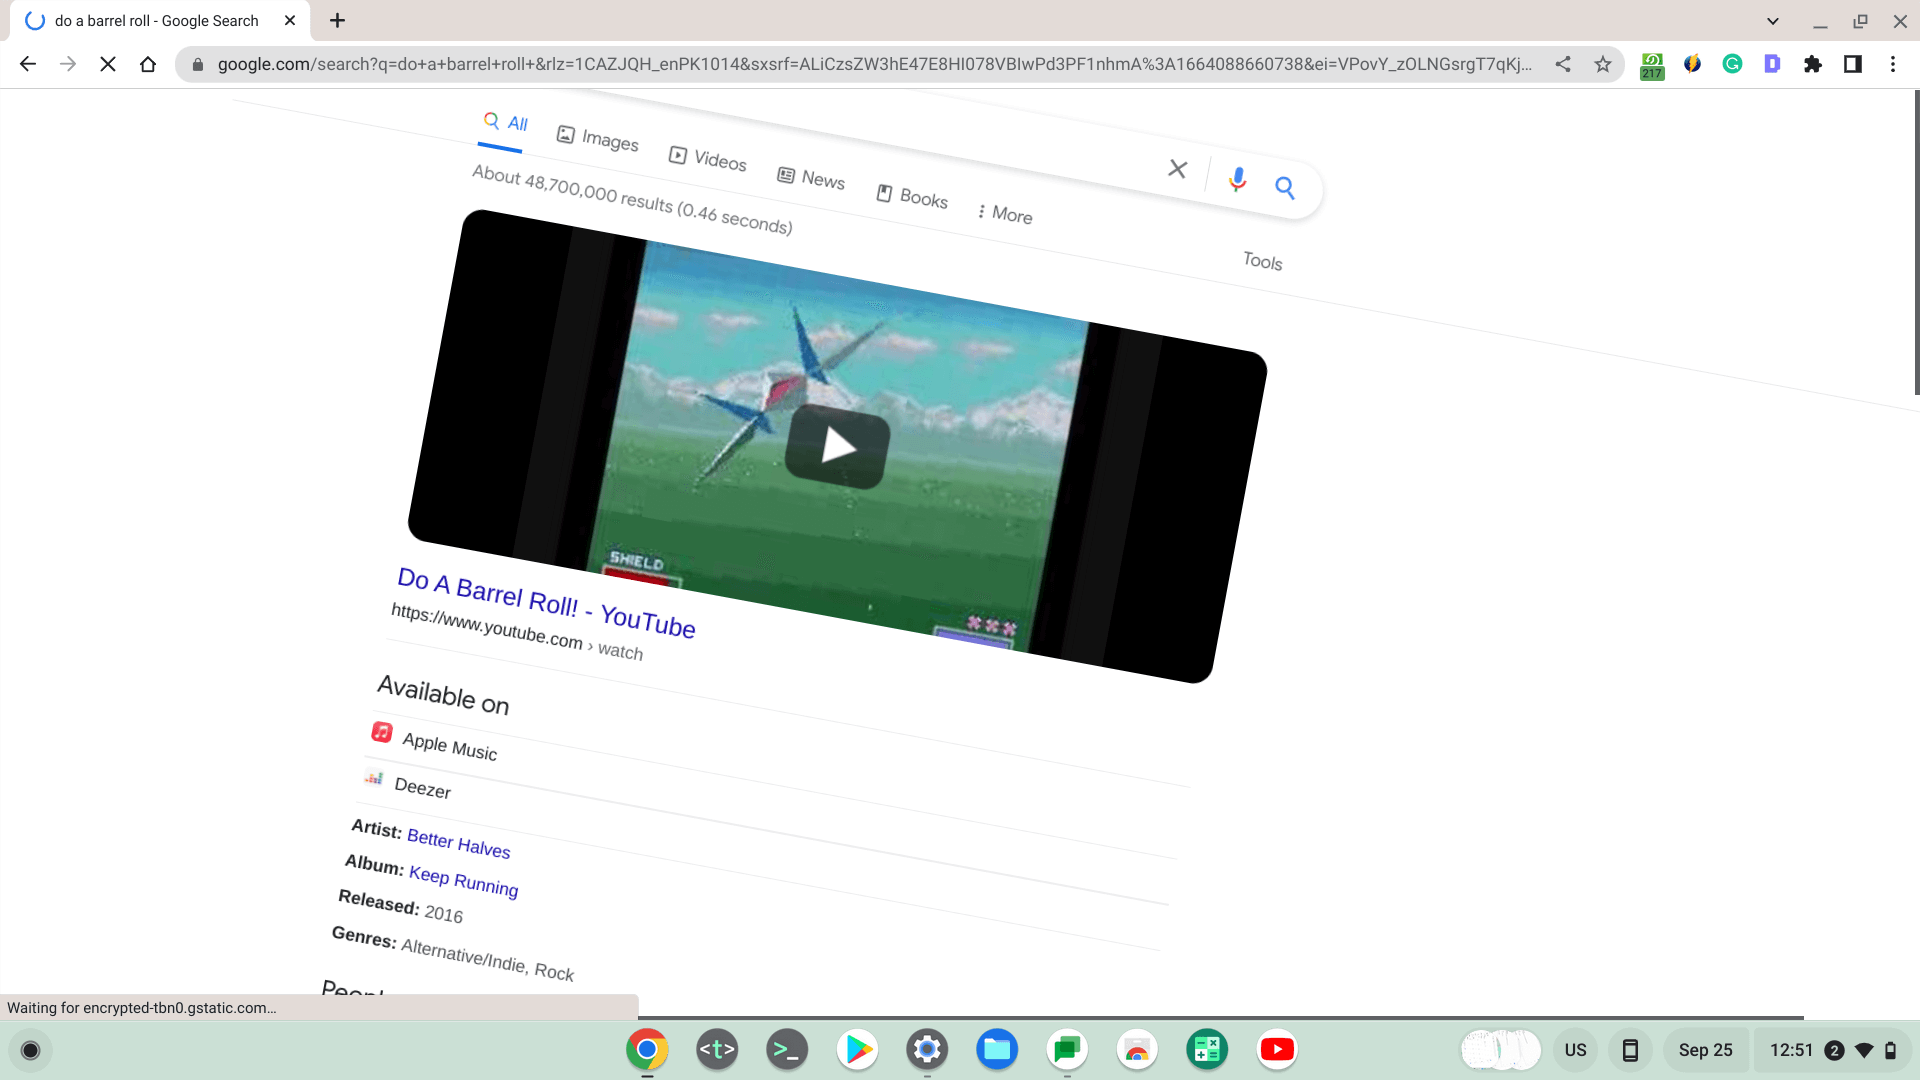 The Chrome browser pulling off a barrel roll